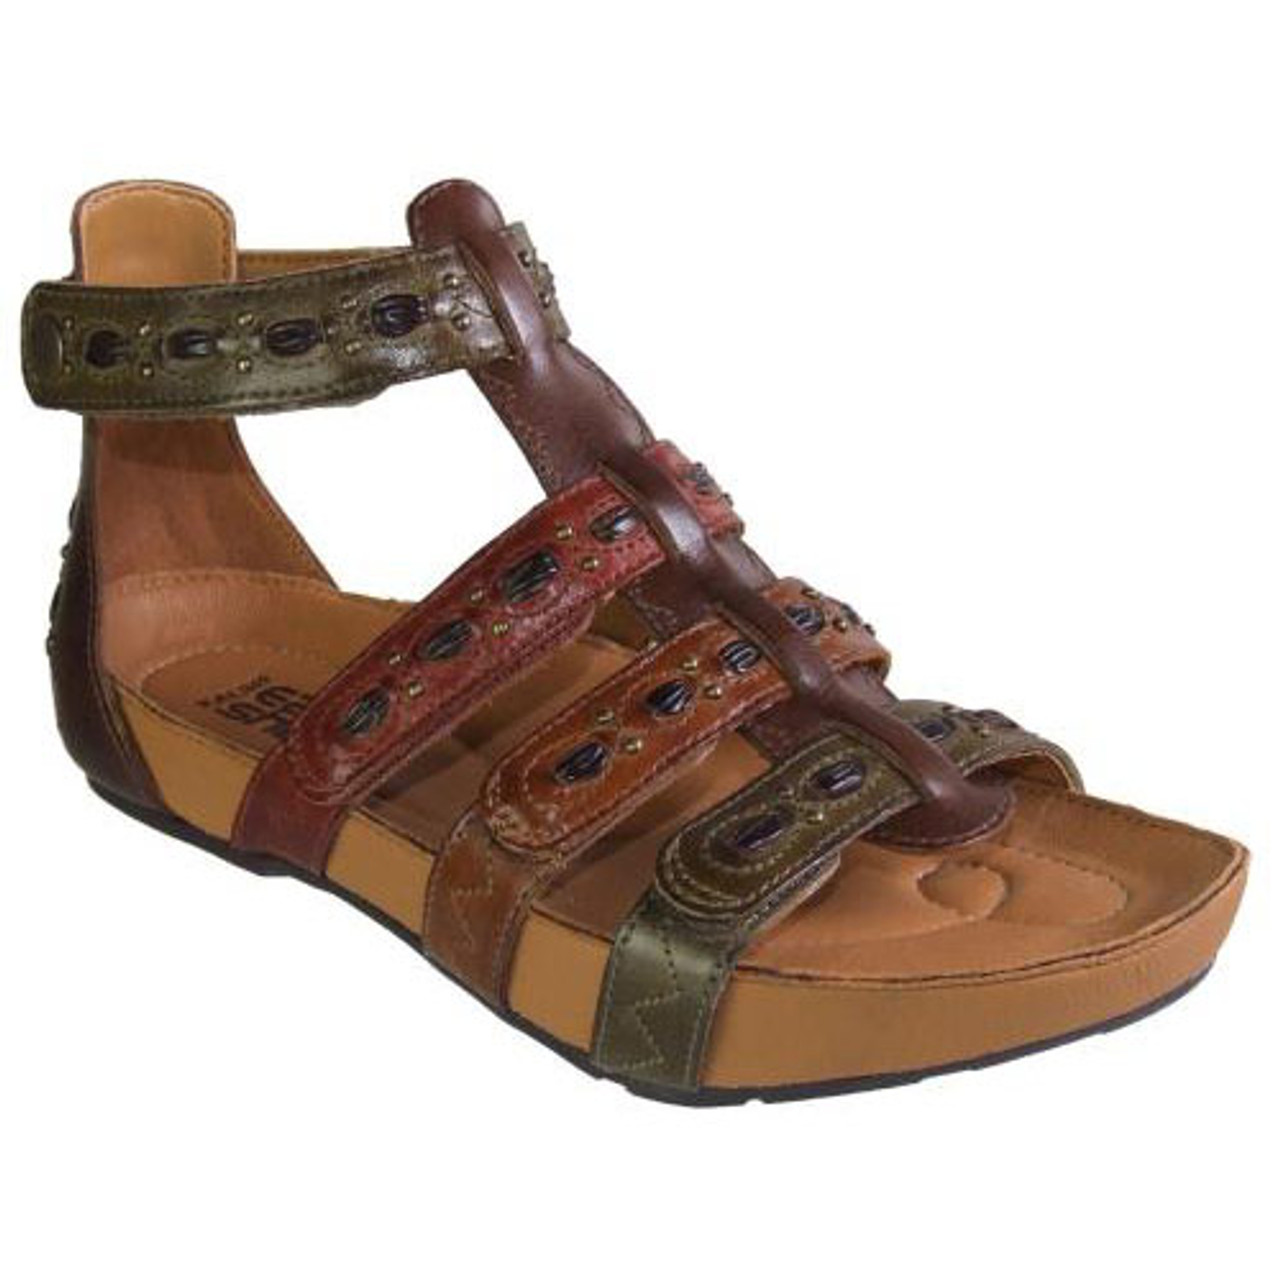 kalso earth shoes outlet